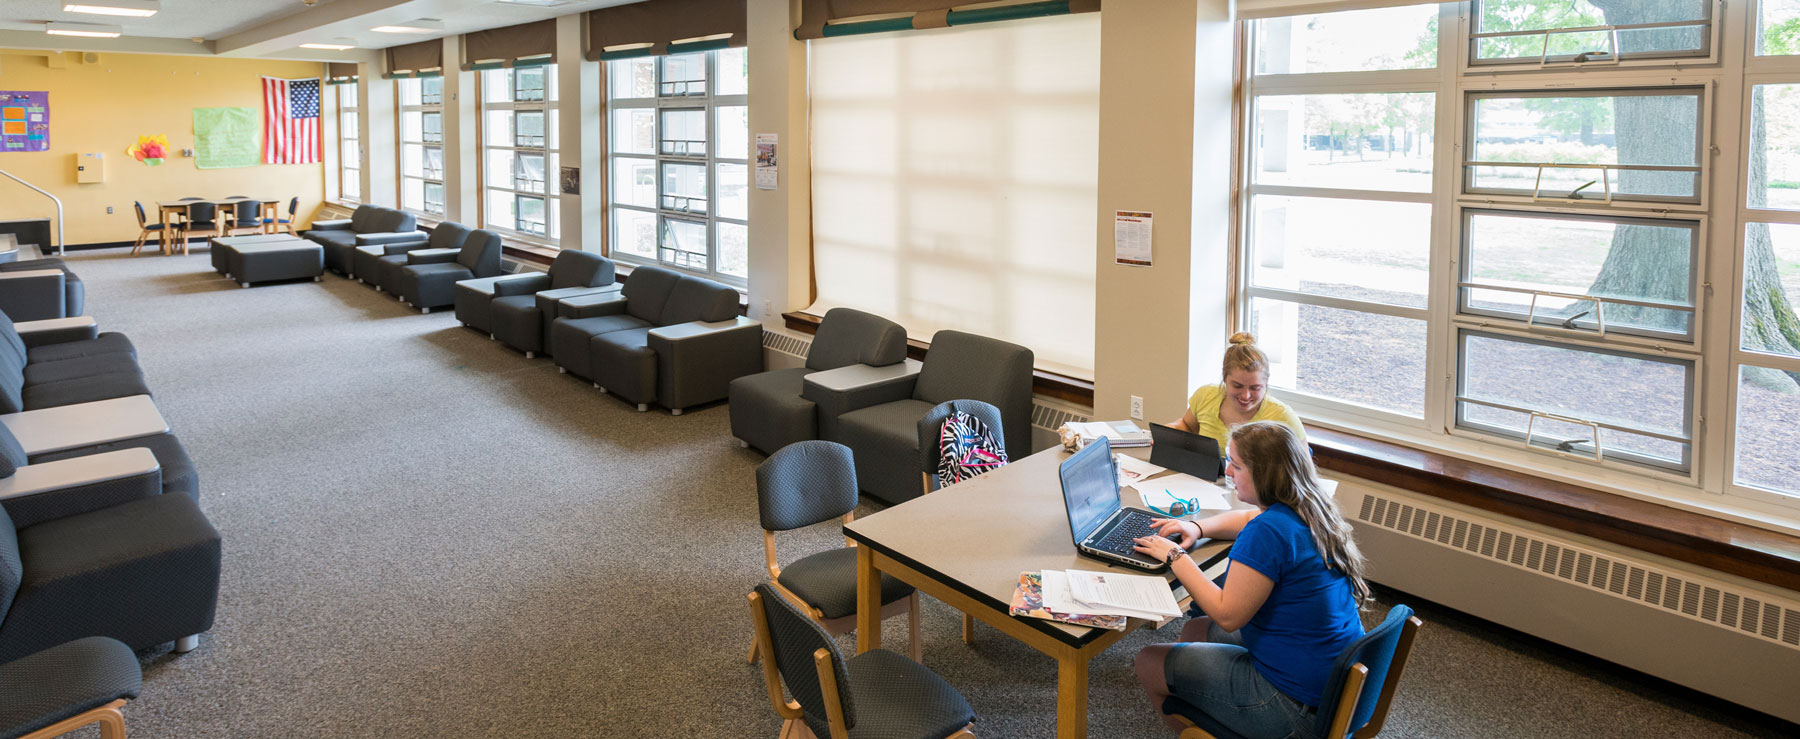 Students study together in a large lounge area with comfortable seating